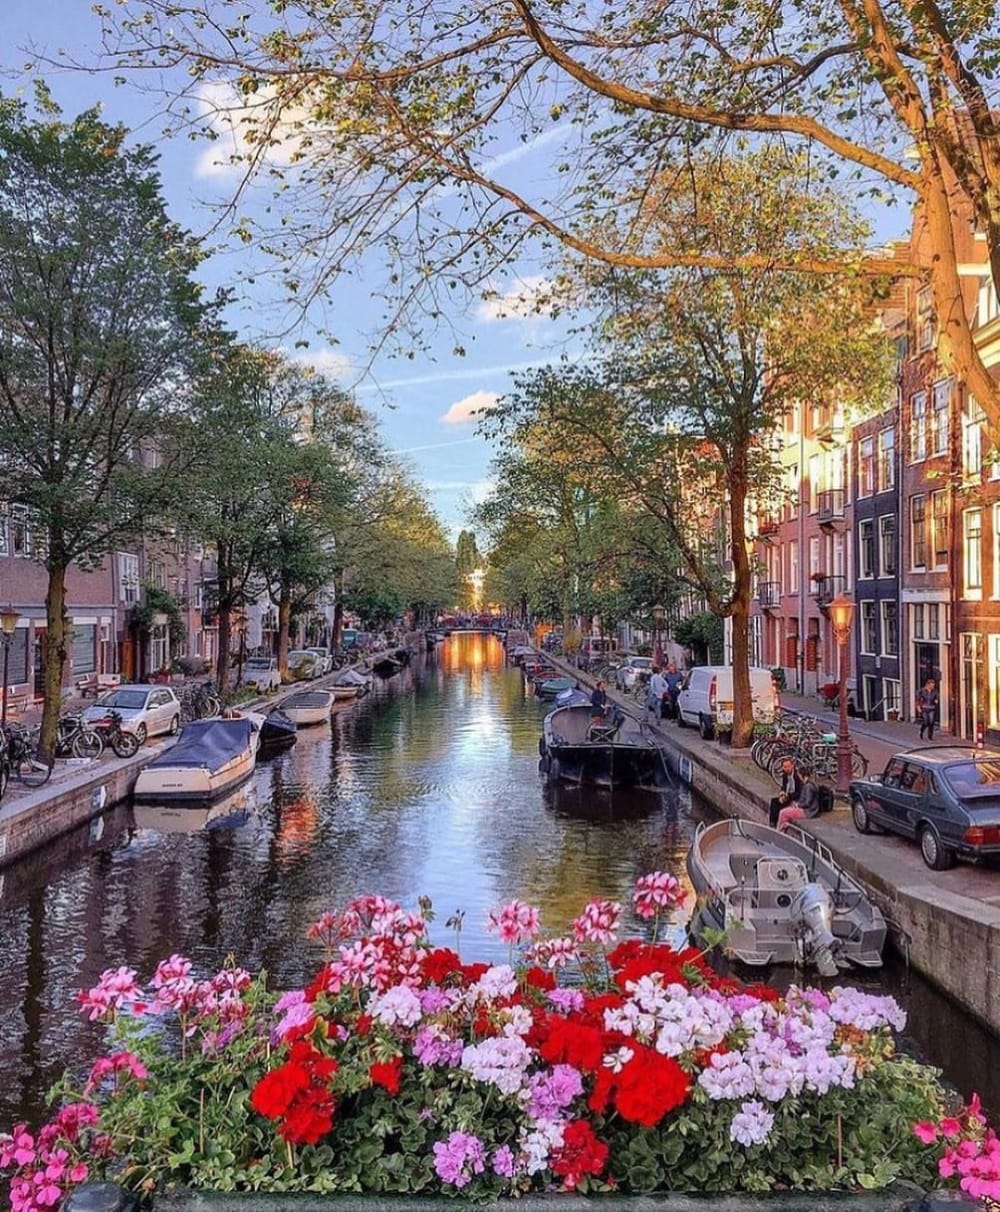 Pretty Amsterdam @eve365 shared by ♡ on We Heart It